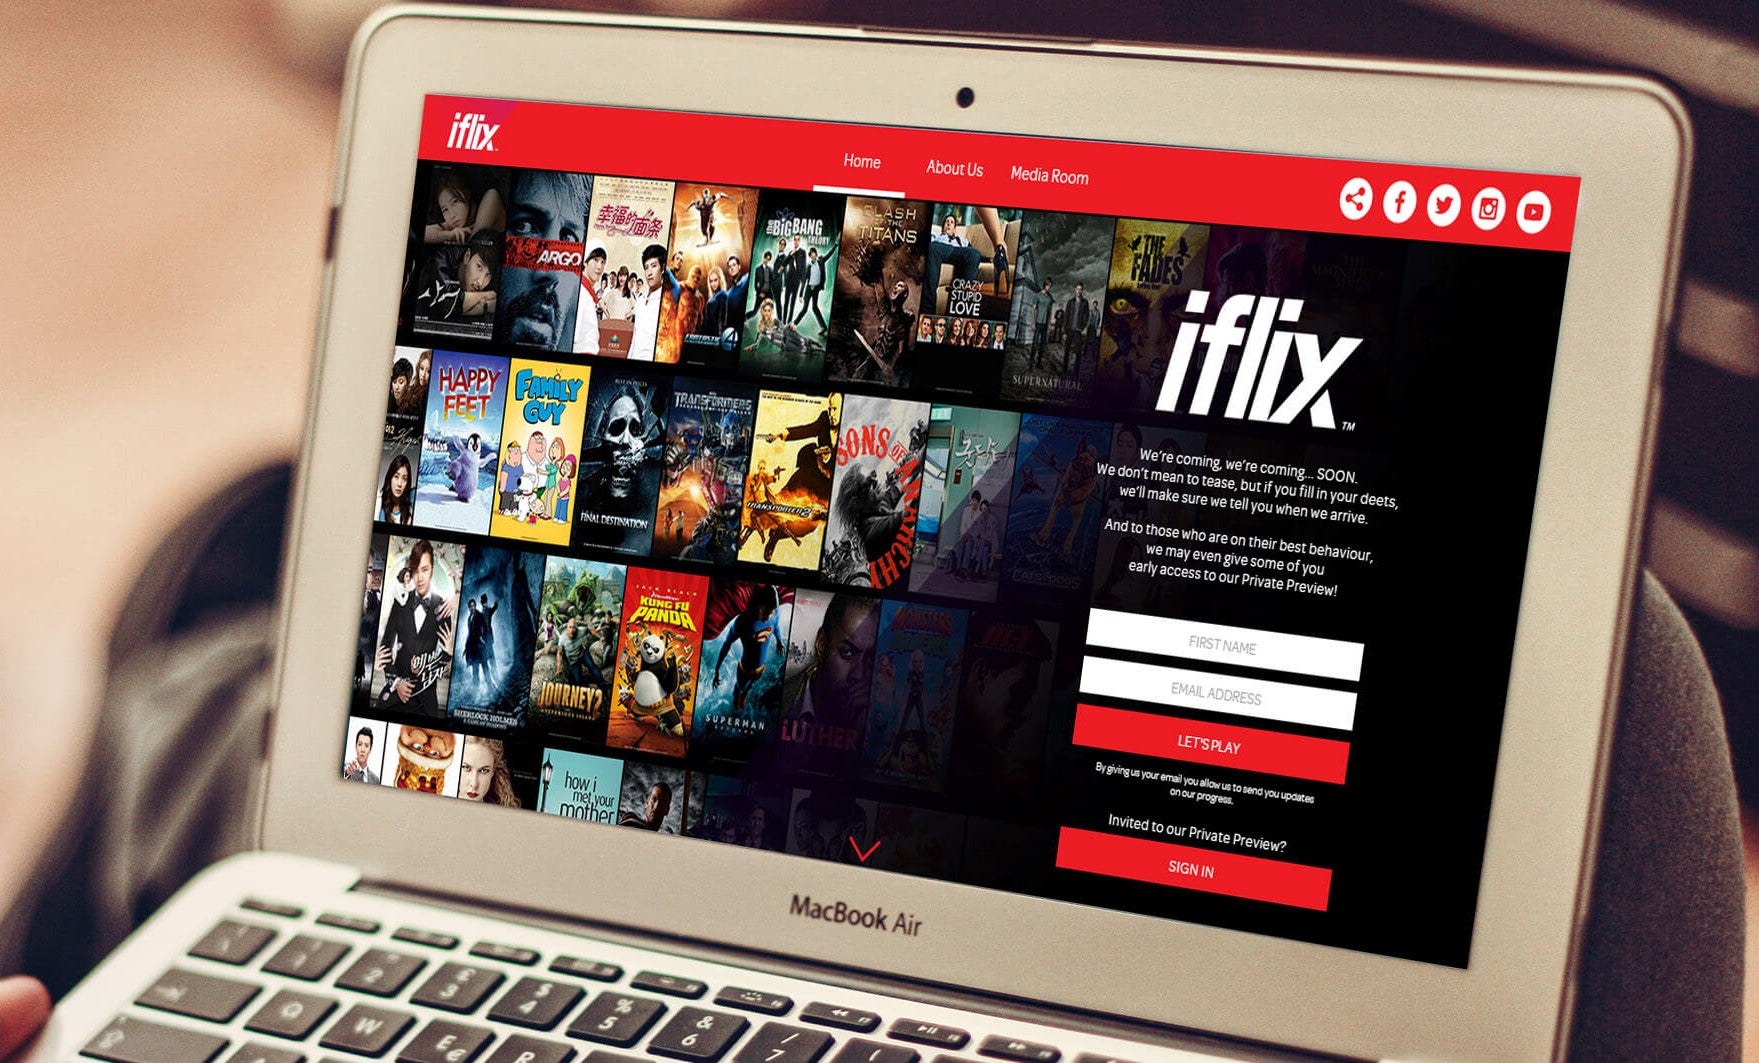 Malaysians Will Probably Have to Pay GST for Netflix and iflix Soon - WORLD OF BUZZ